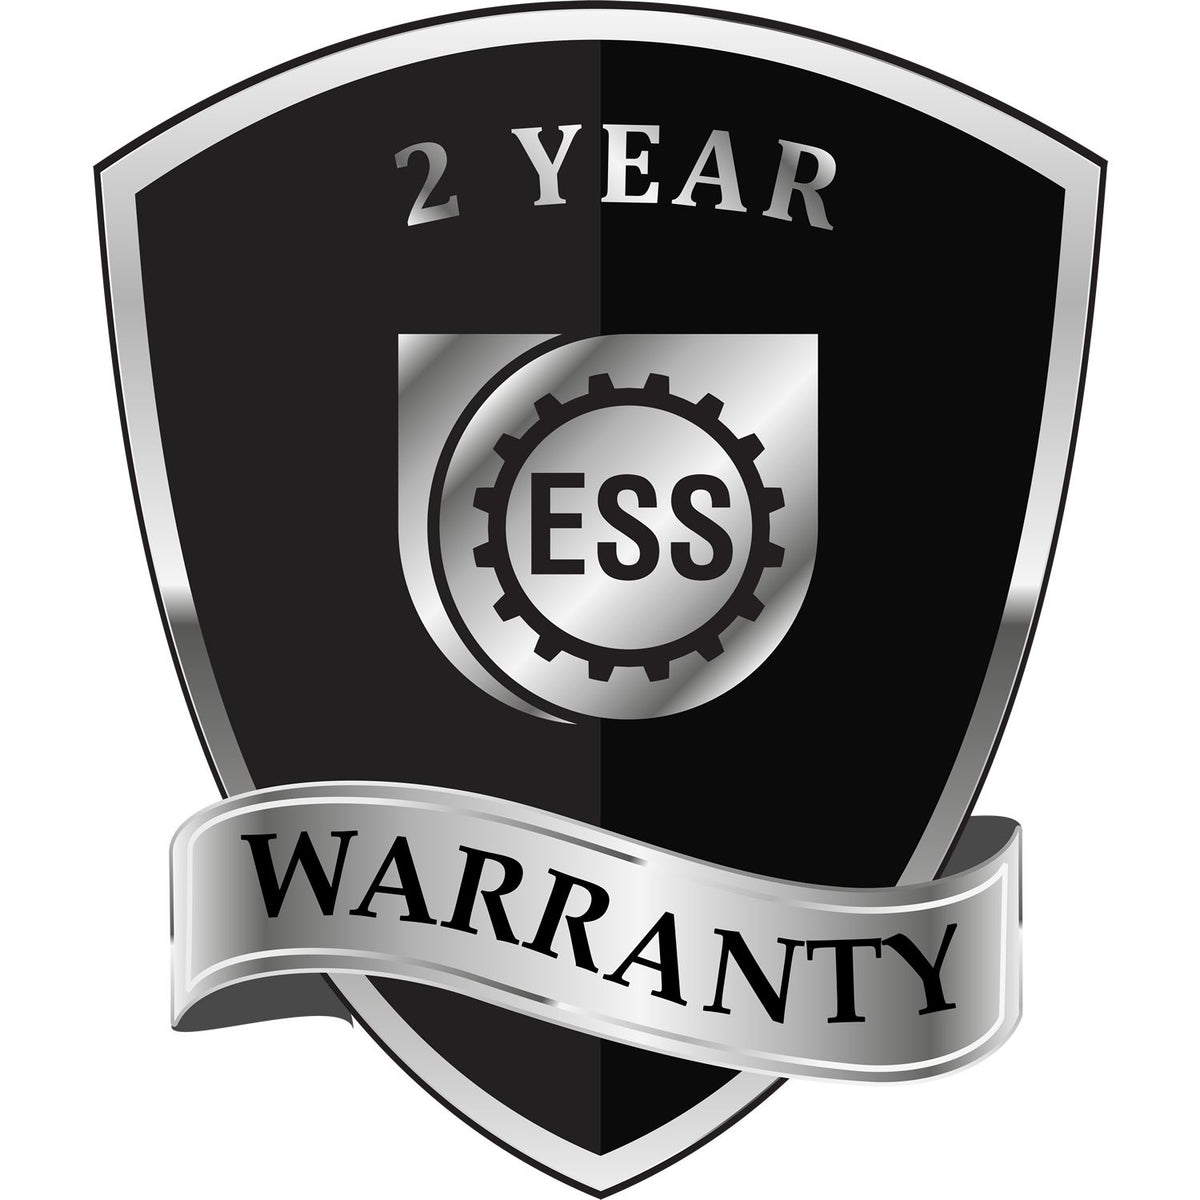 A black and silver badge or emblem showing warranty information for the Hybrid Vermont Landscape Architect Seal